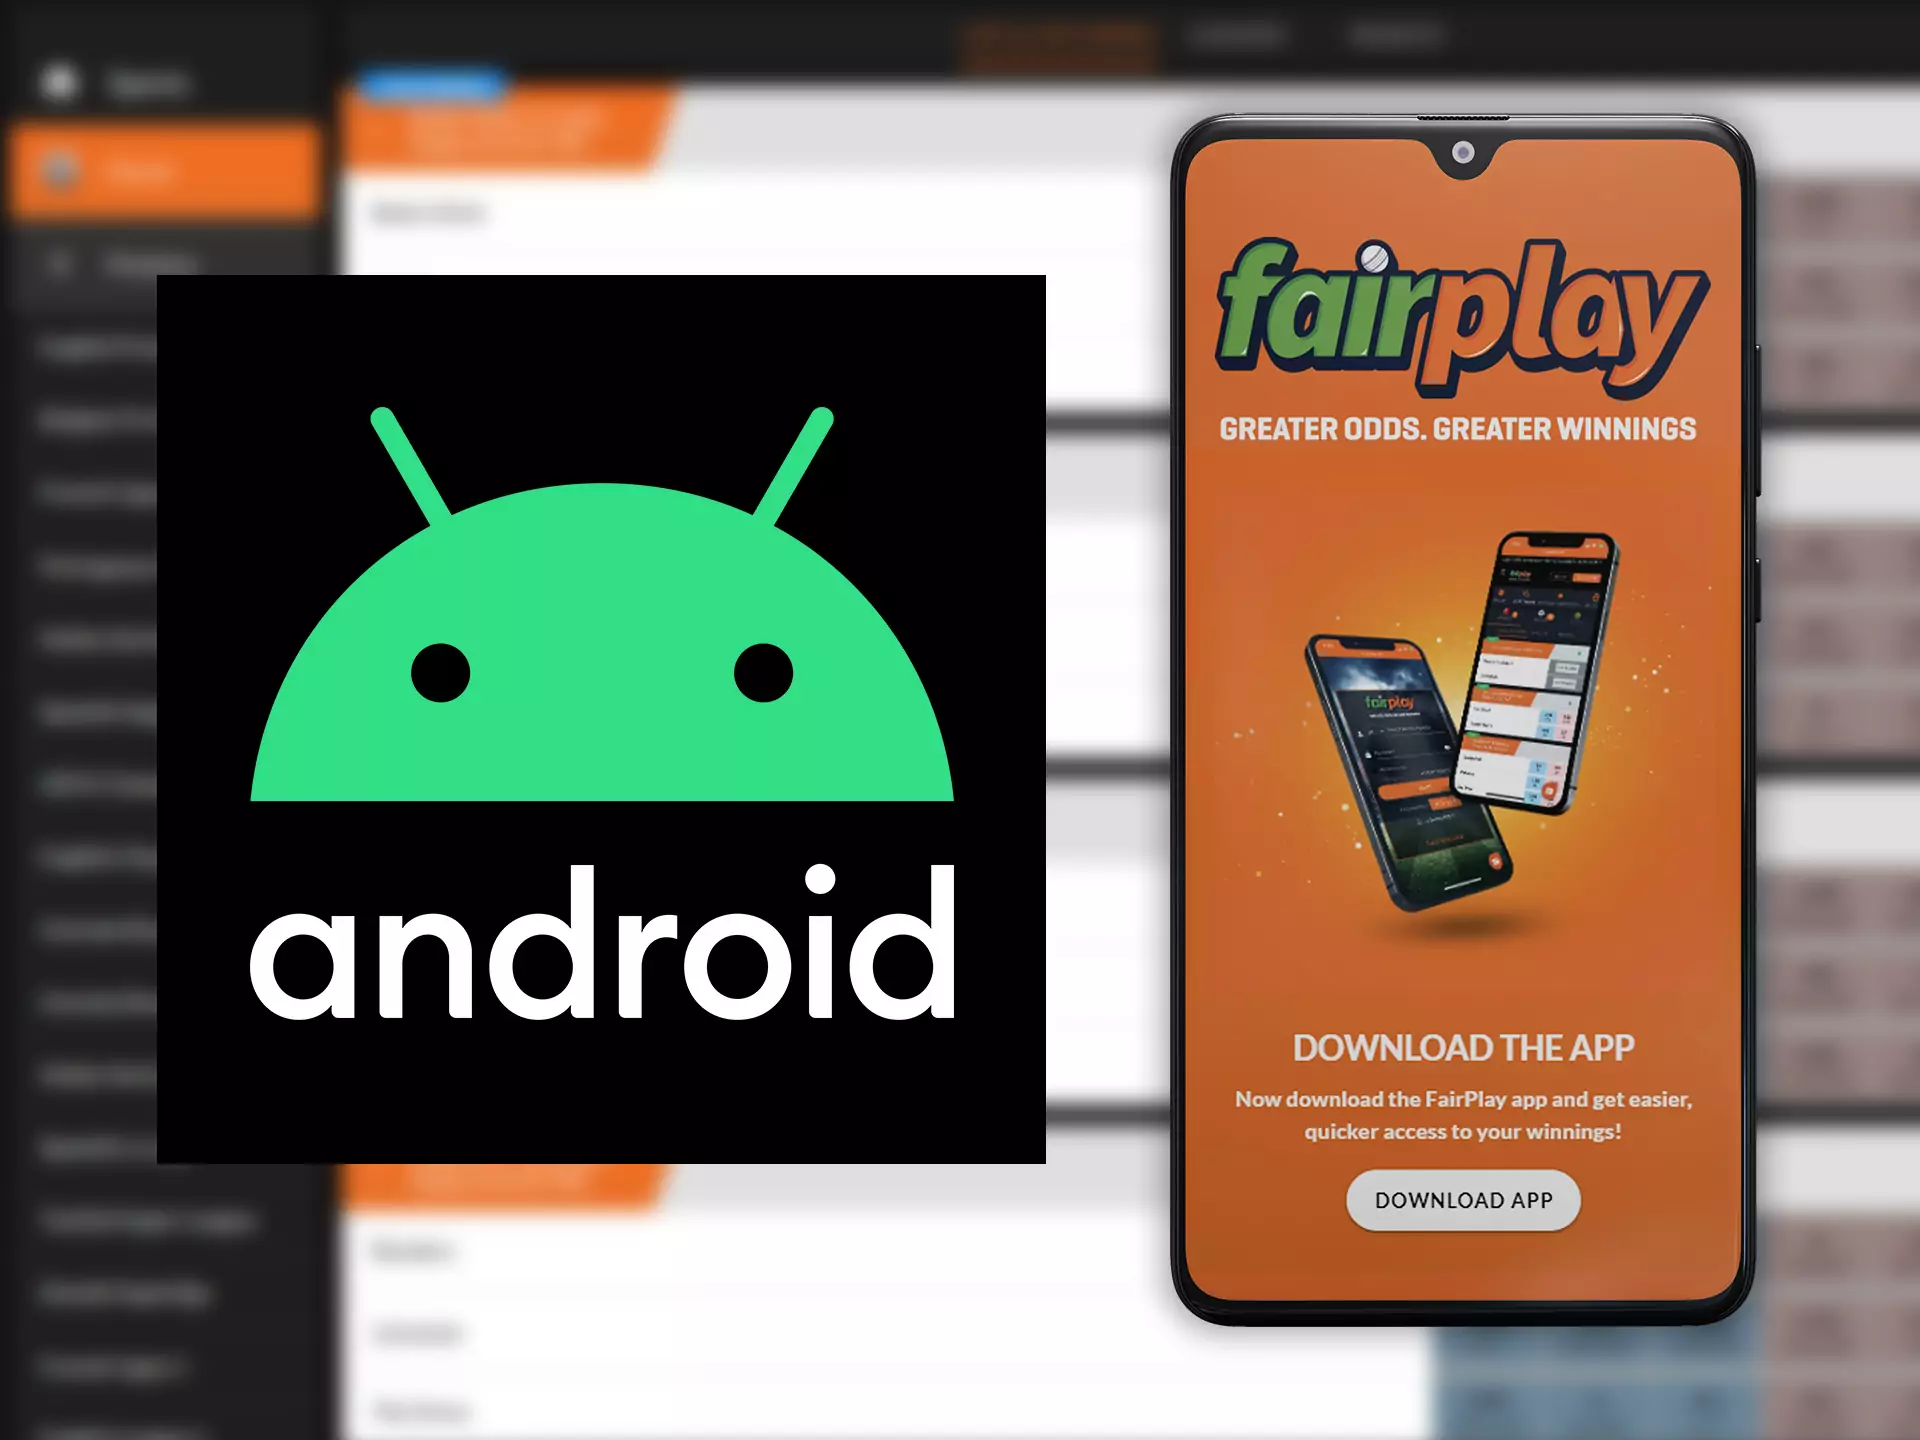 Follow the instructions to download and install the Fairplay app for Android.